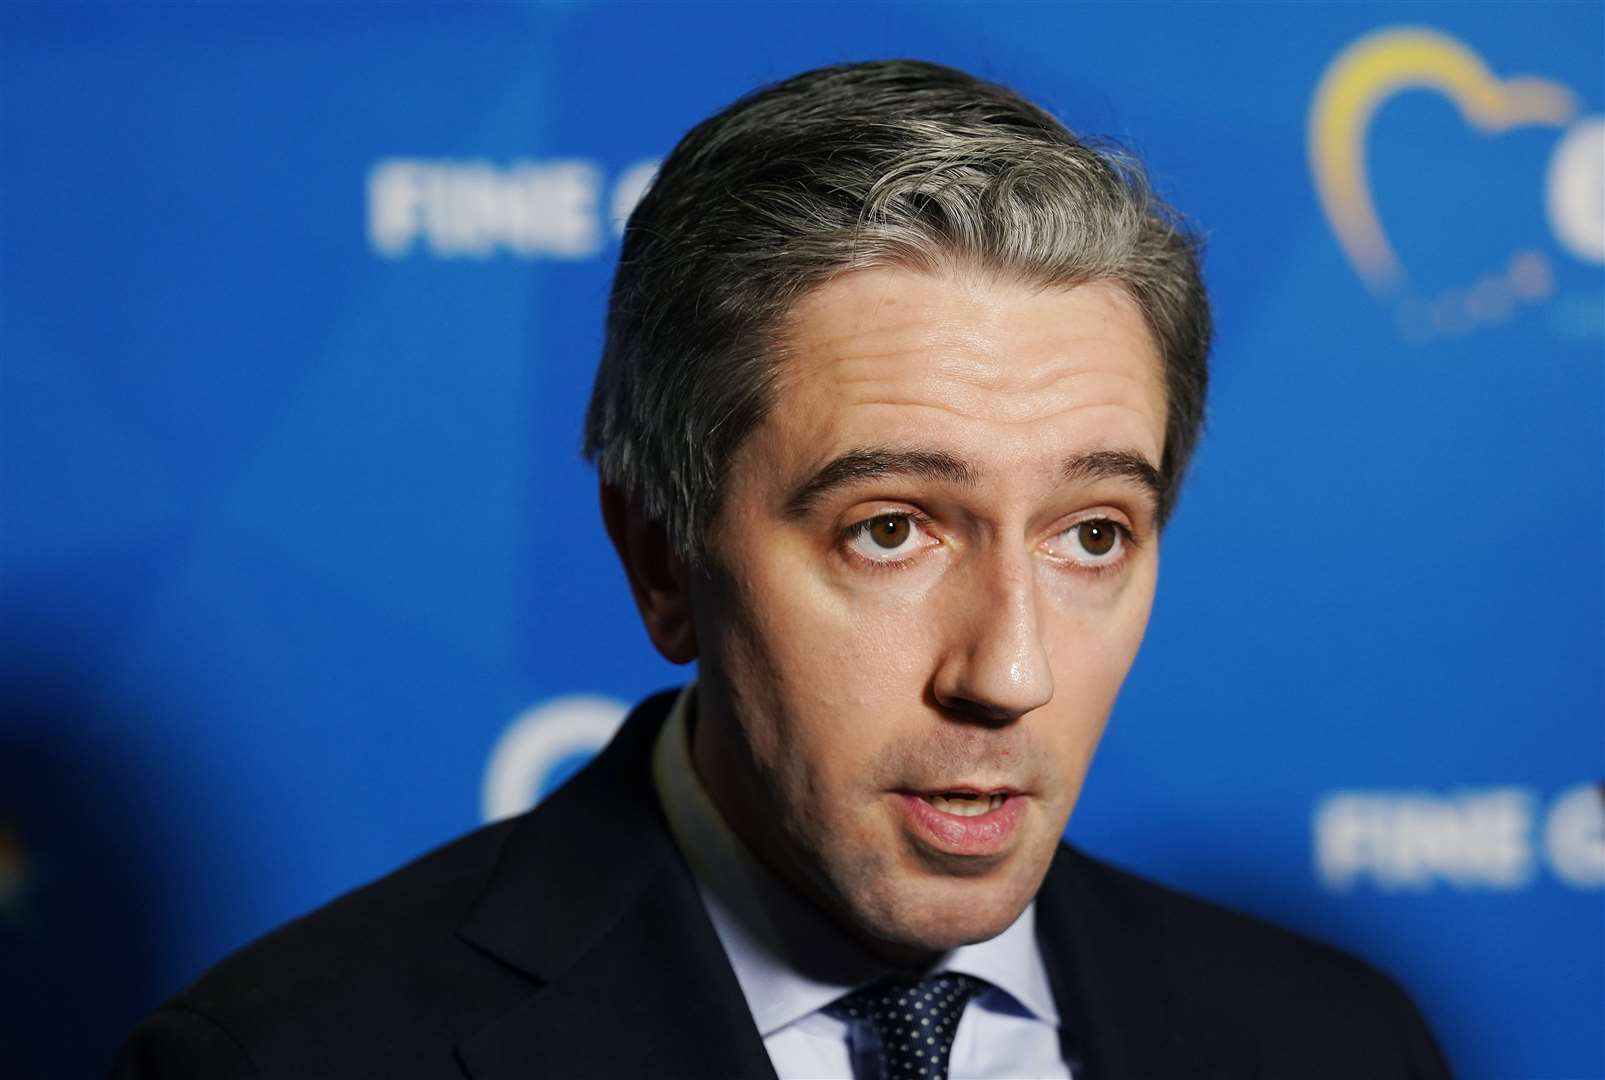 Irish premier Simon Harris said Ireland will not ‘provide a loophole’ for other countries’ migration challenges (Brian Lawless/PA)